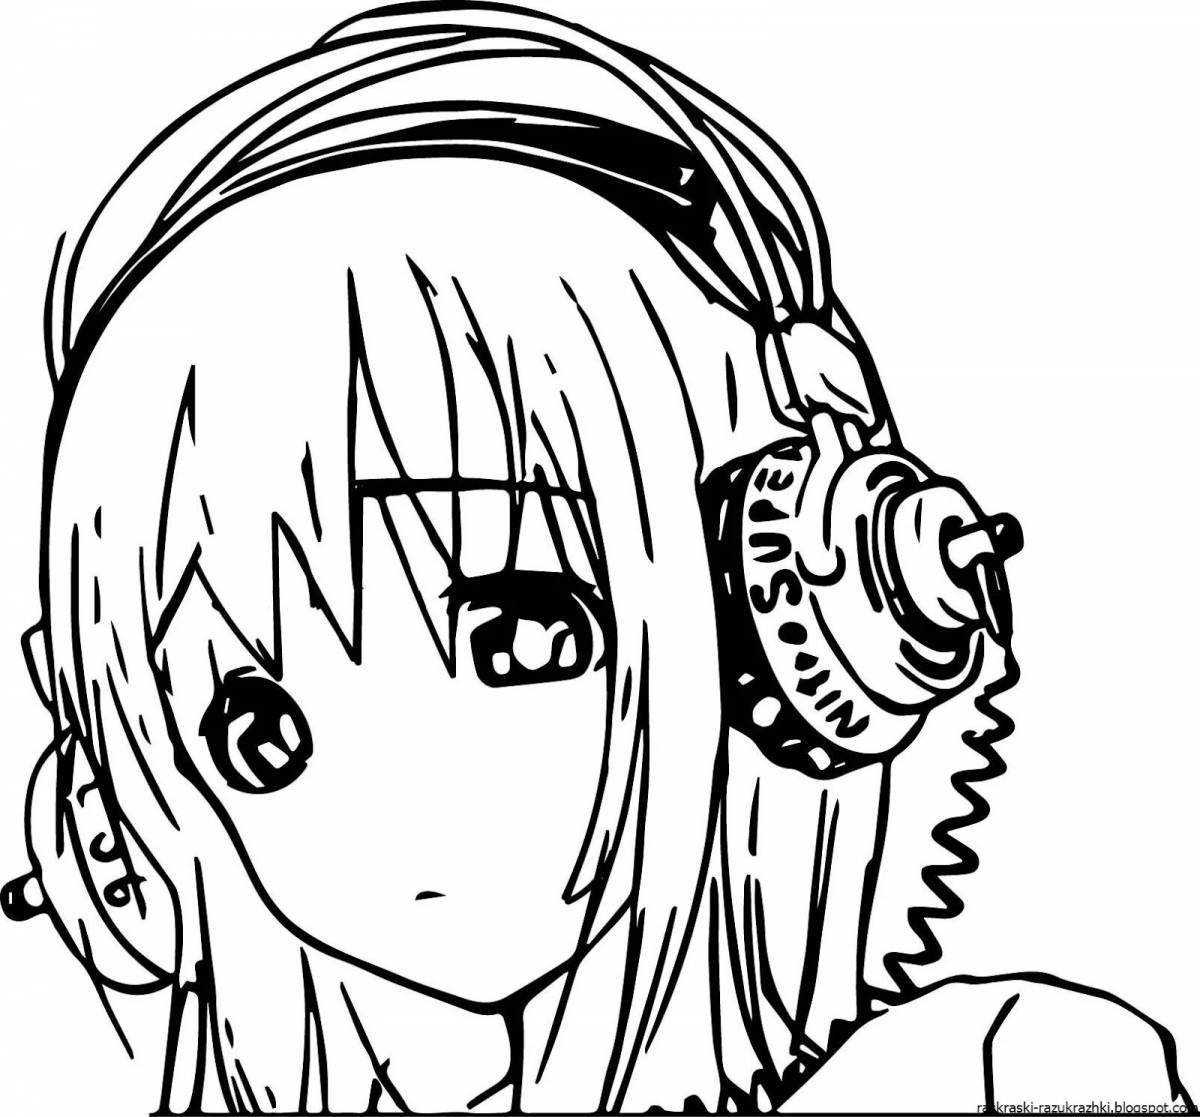 Sparkly coloring girl with headphones